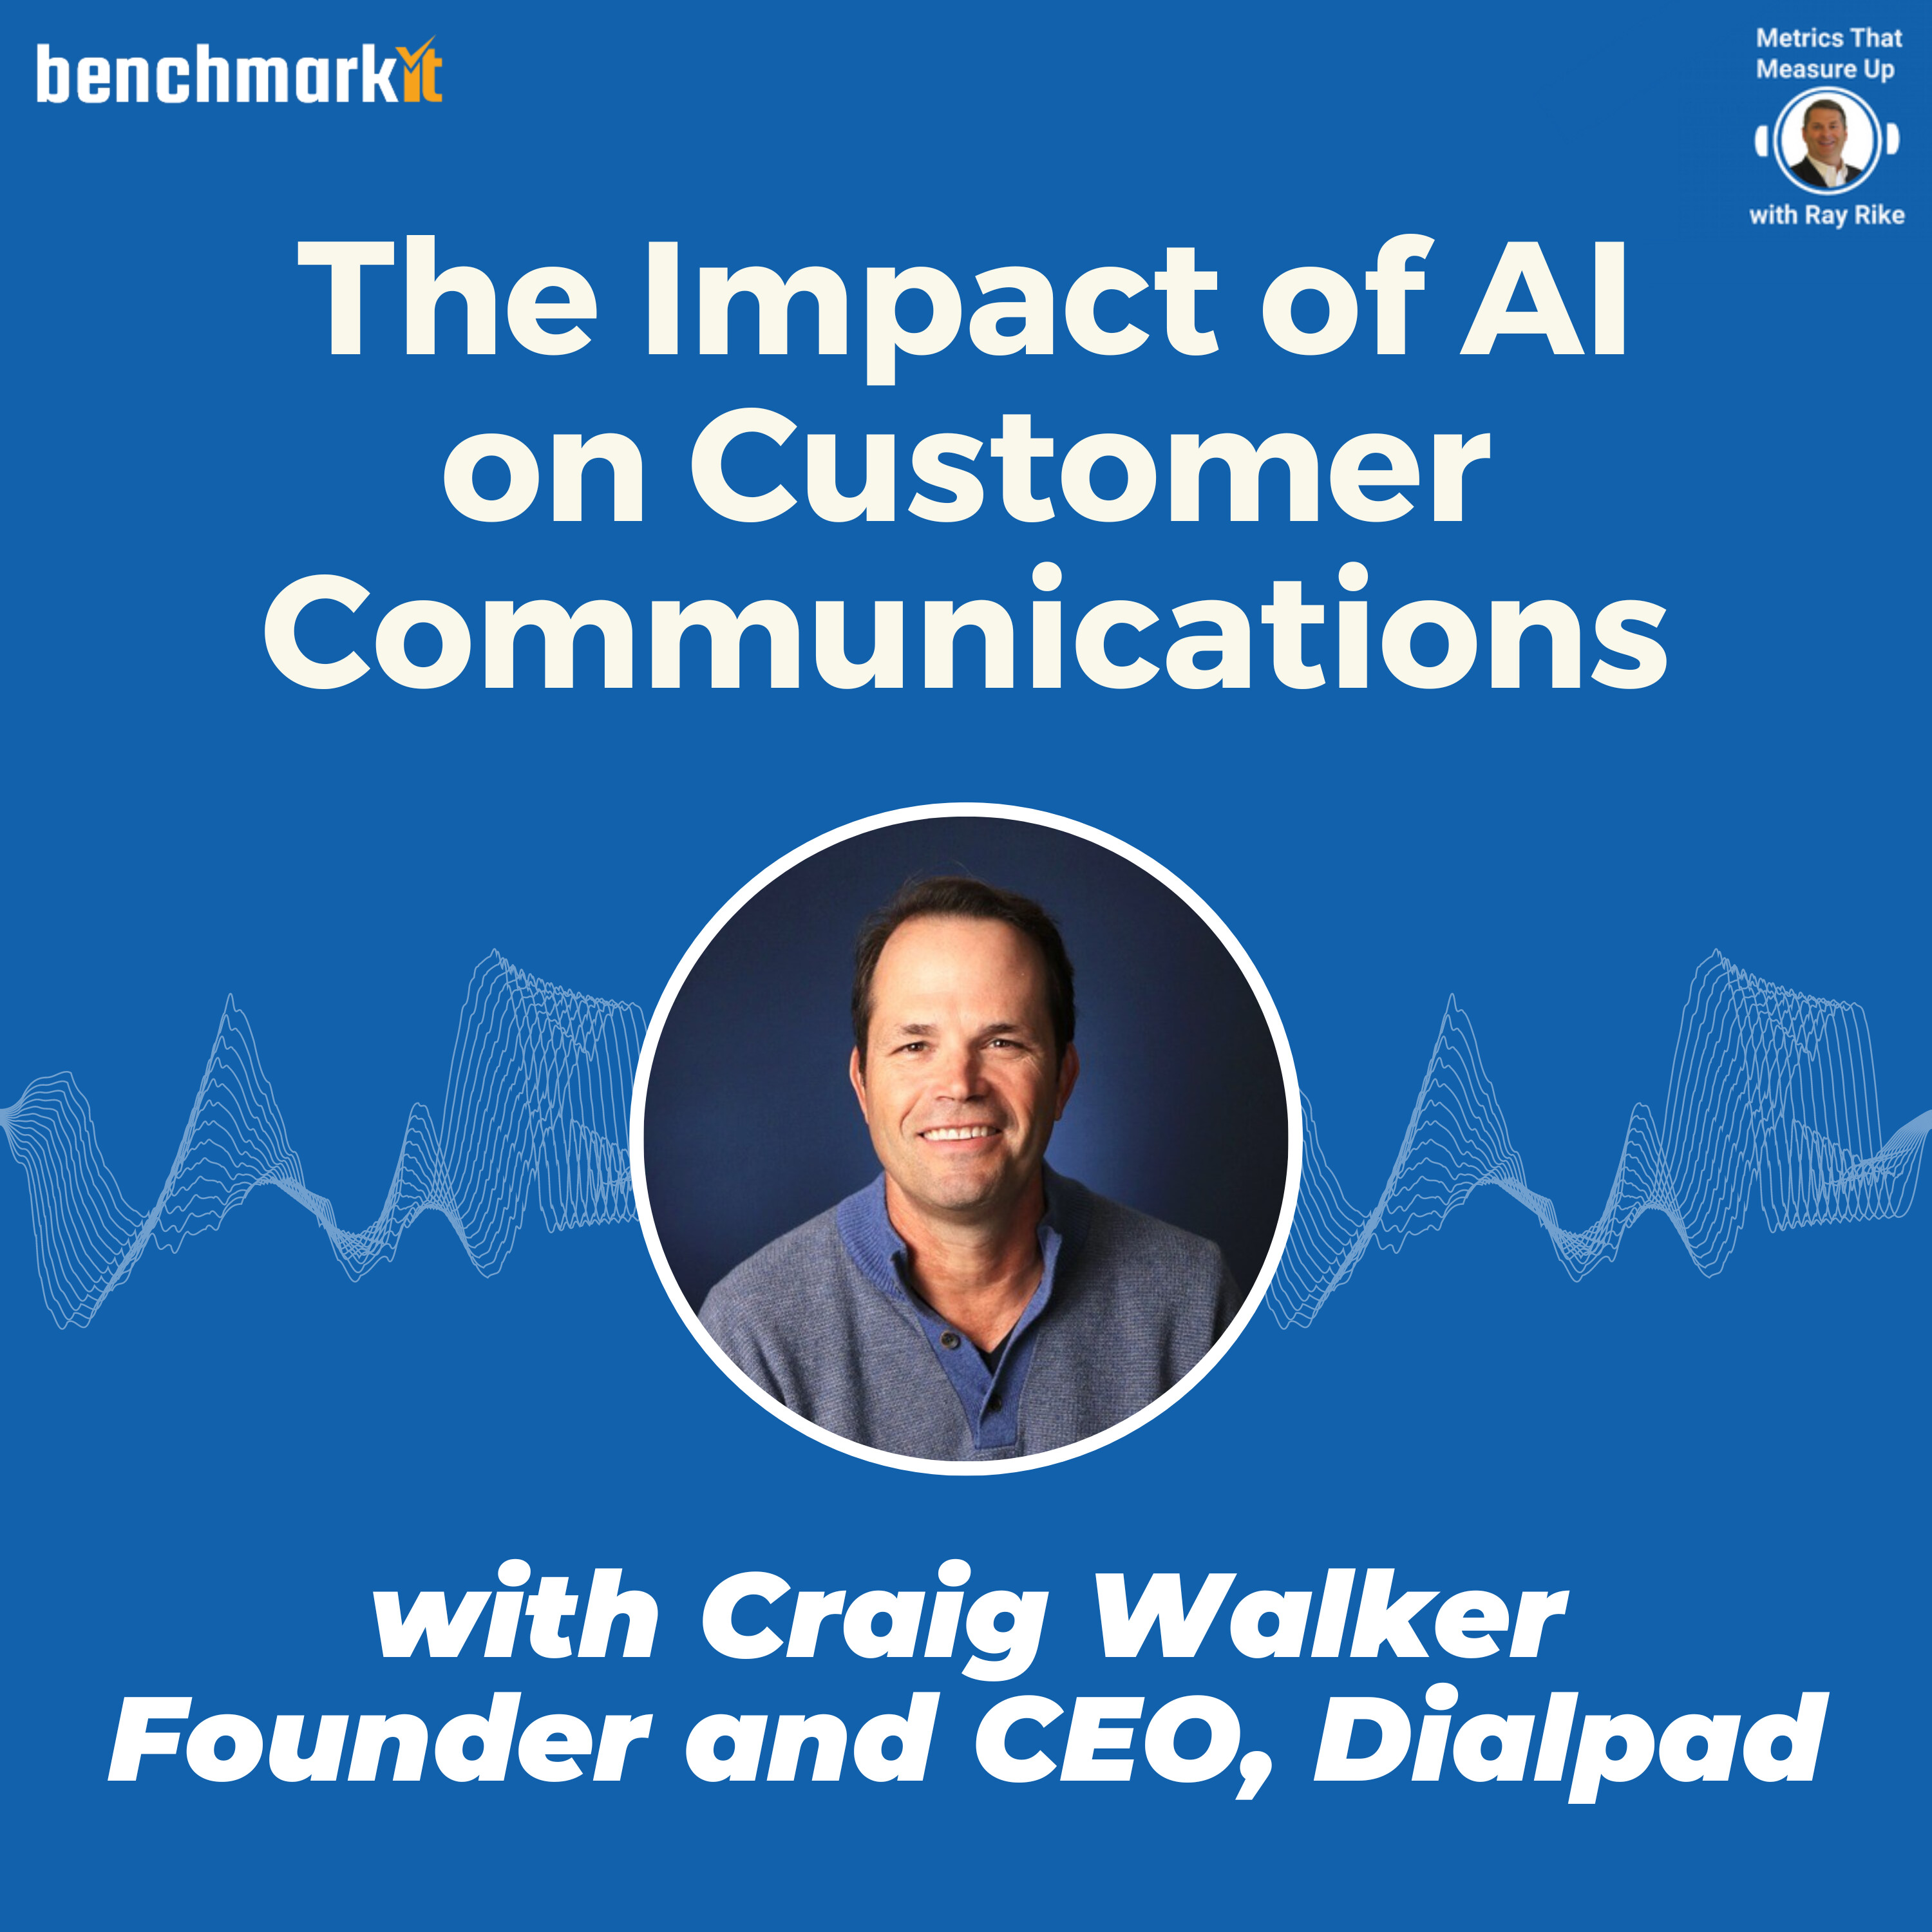 The Impact of AI on Customer Communications - with Craig Walker, Founder and CEO Dialpad